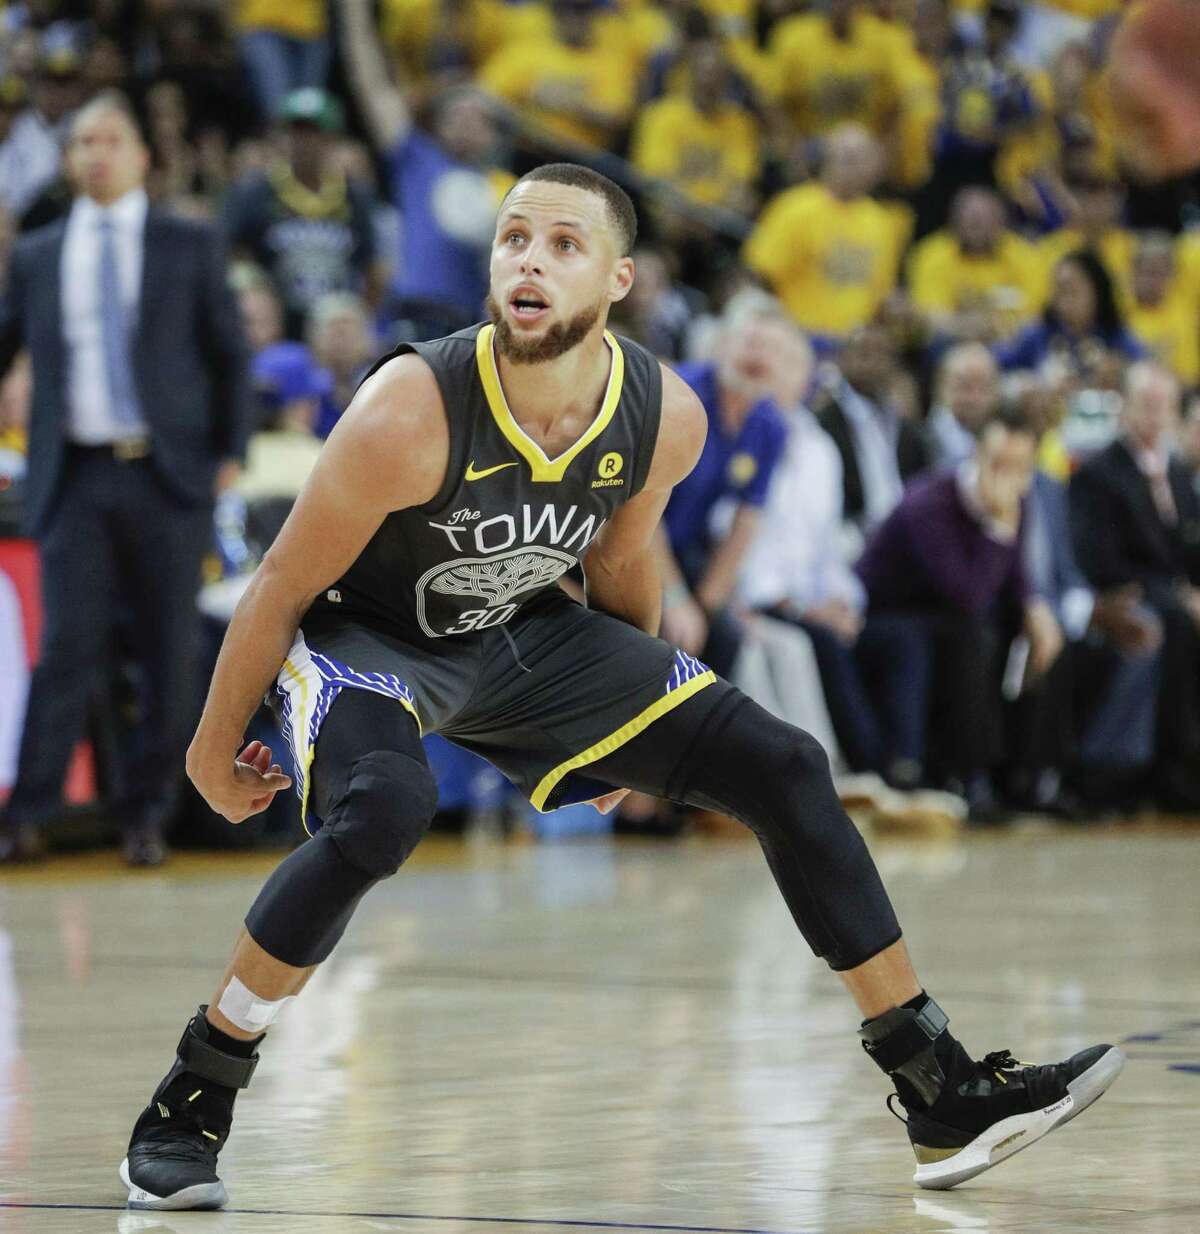 Golden State Warriors' Stephen Curry watches his second quarter three-pointer go in during game 2 of The NBA Finals between the Golden State Warriors and the Cleveland Cavaliers at Oracle Arena on Sunday, June 3, 2018 in Oakland, Calif.